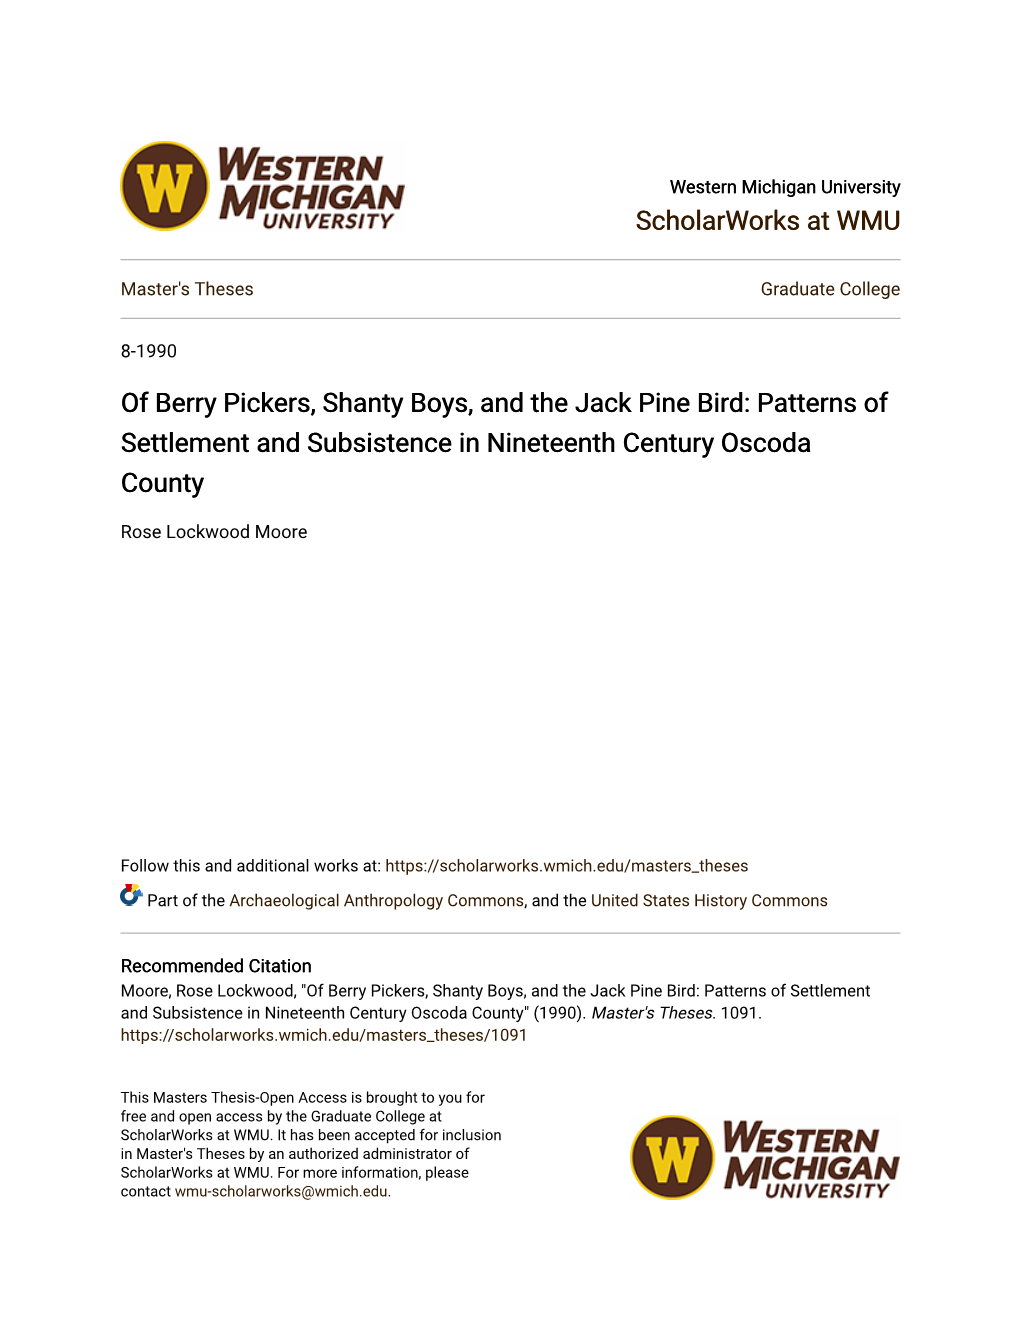 Of Berry Pickers, Shanty Boys, and the Jack Pine Bird: Patterns of Settlement and Subsistence in Nineteenth Century Oscoda County